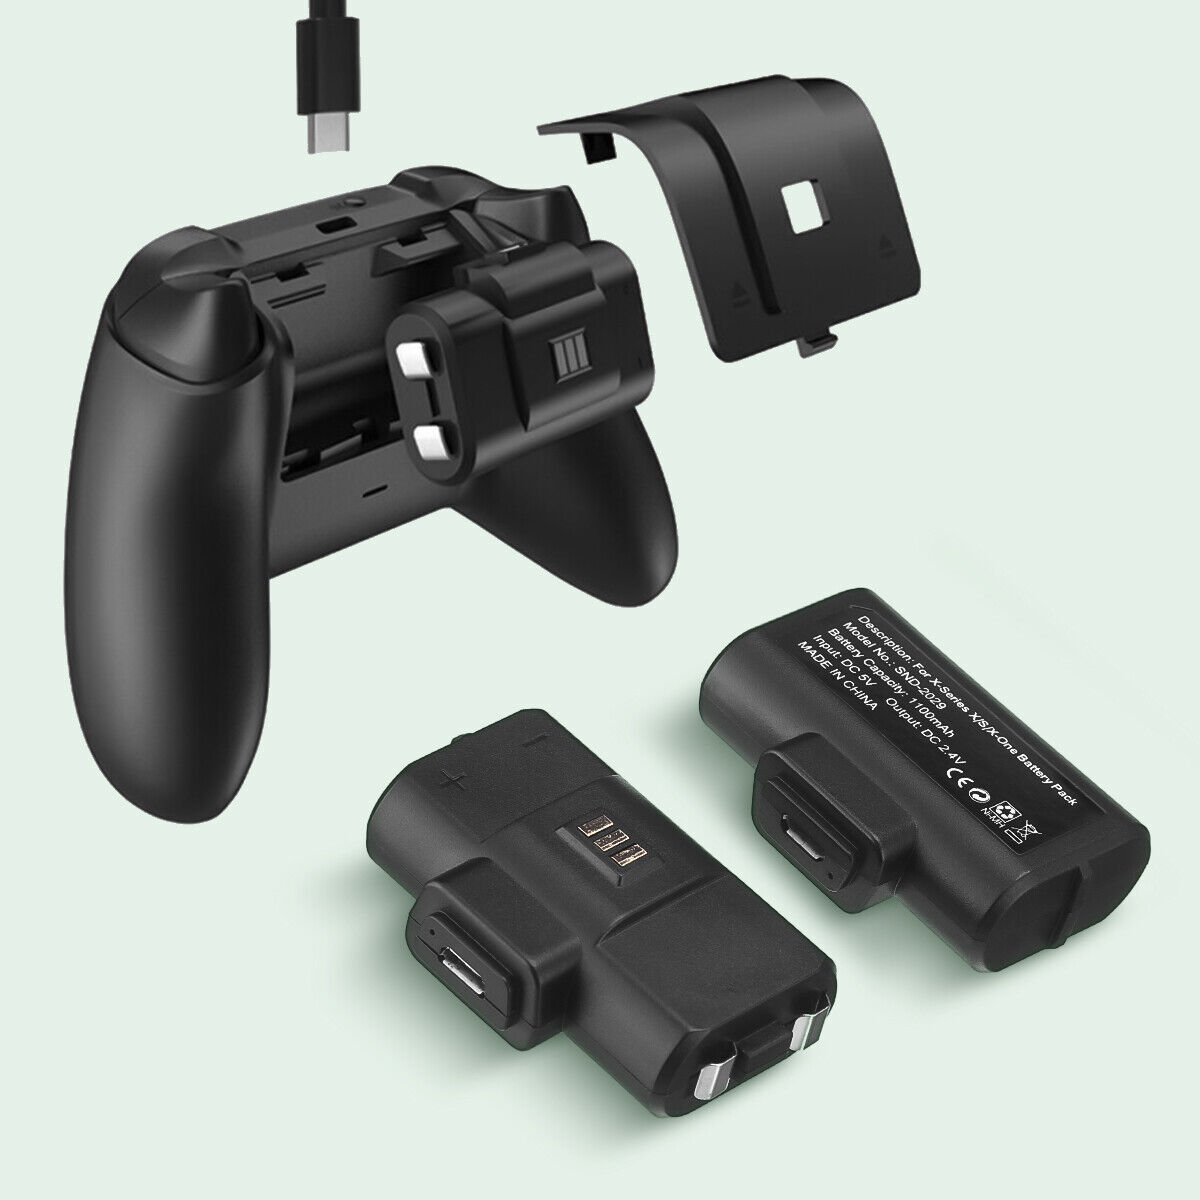 Rechargeable Battery Pack For XBox One X/S Series X/S Controller & Charger Cable EBL Does not apply - фотография #7